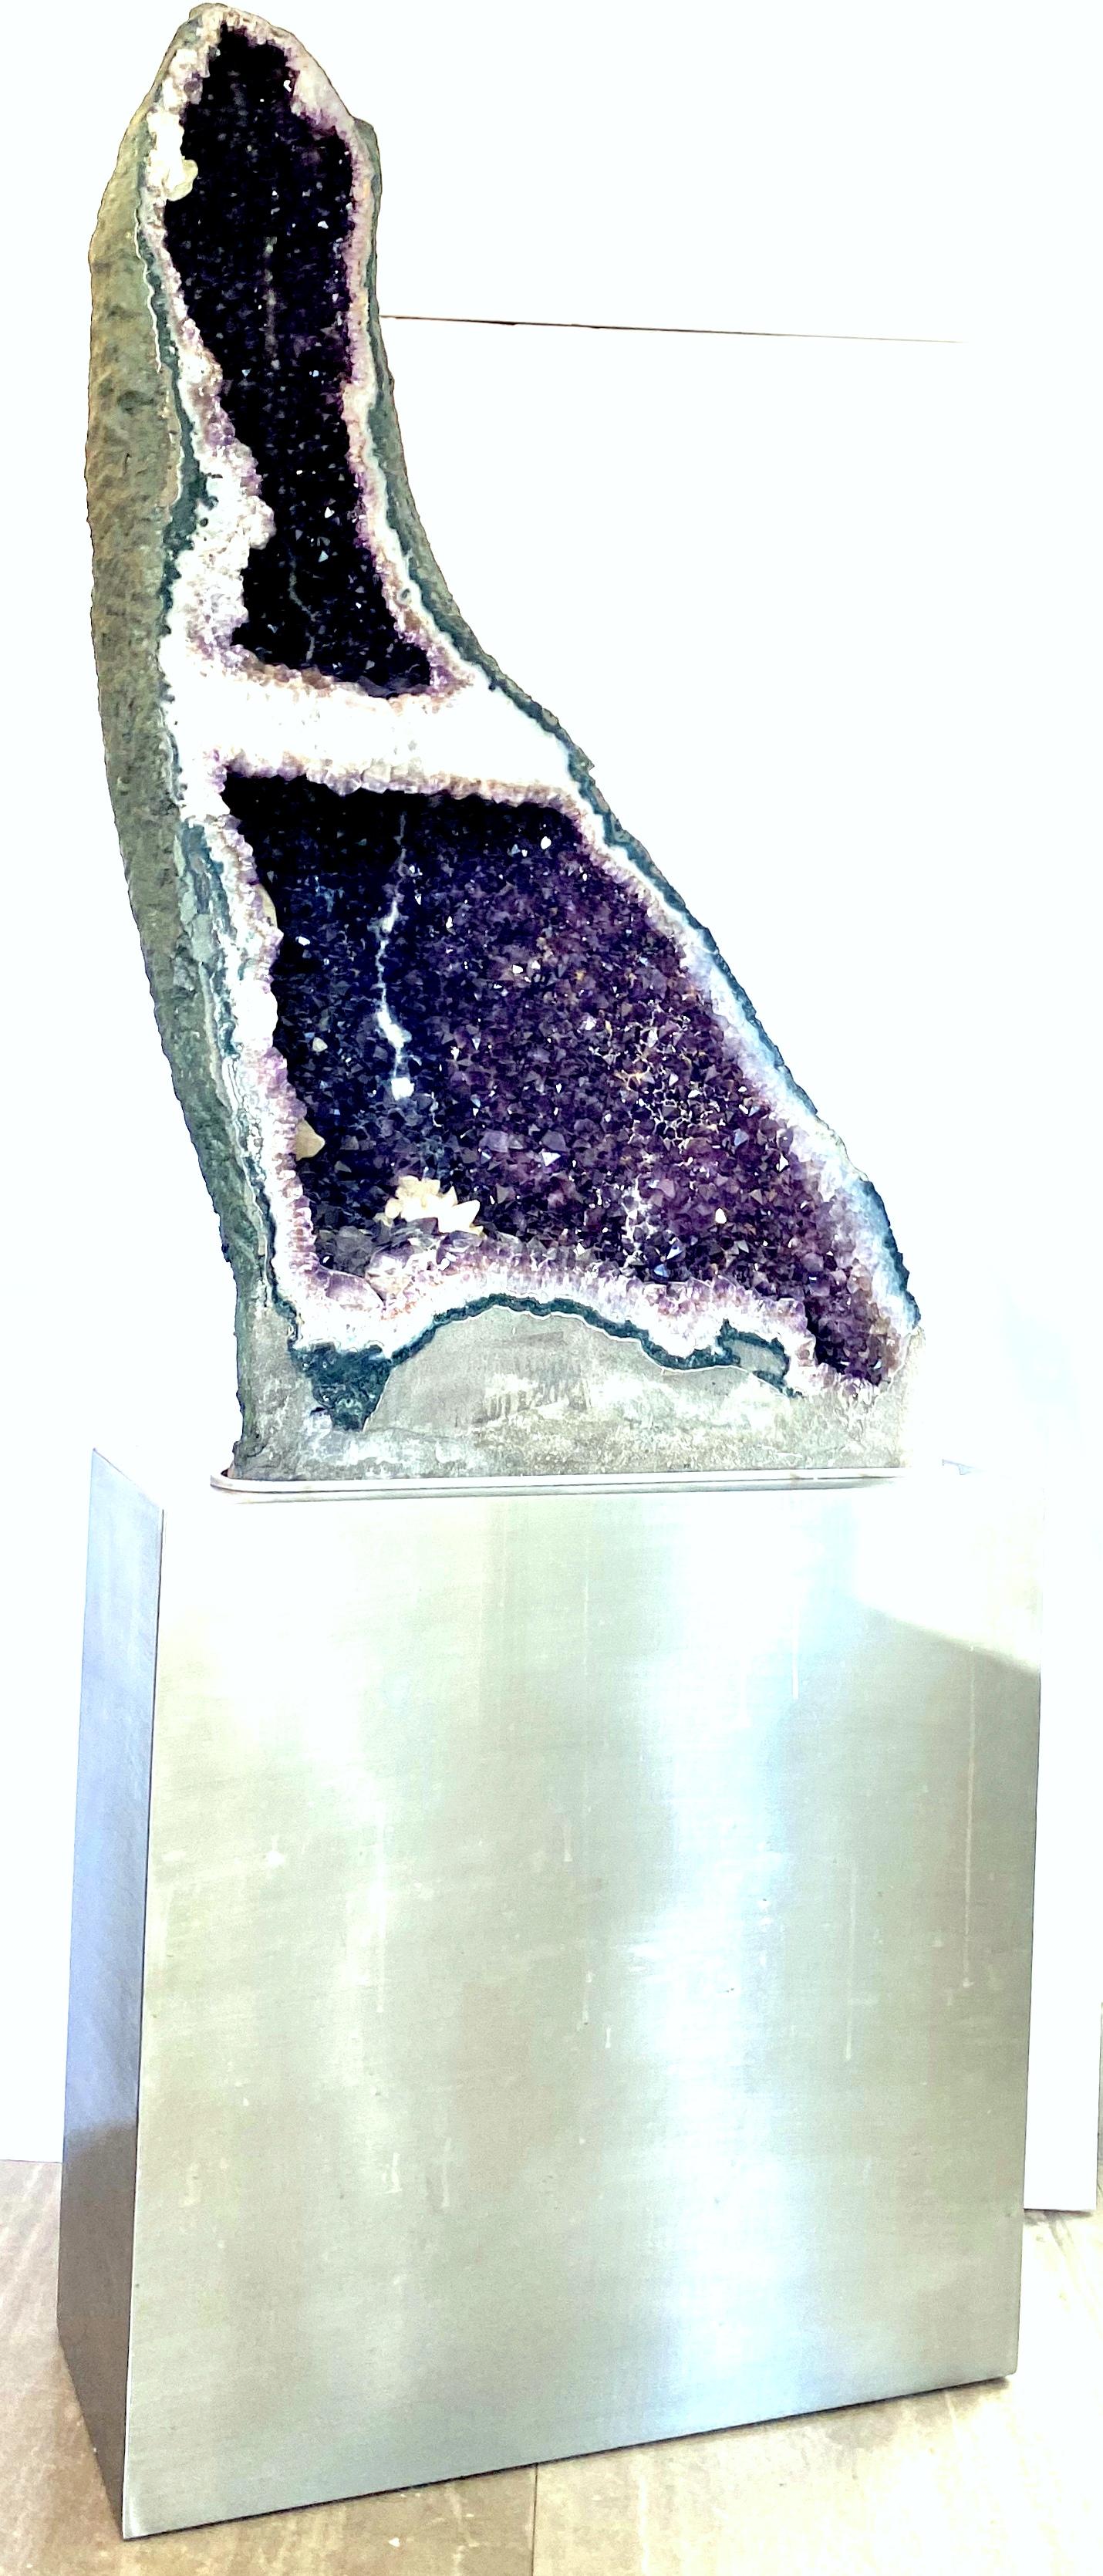 20th century monumental museum quality Brazilian cathedral amethyst geode crystal with custom stand. This one of a kind natural amethyst geode measures just over three feet in height. Features brilliant deep fully pointed consistent purple crystals,